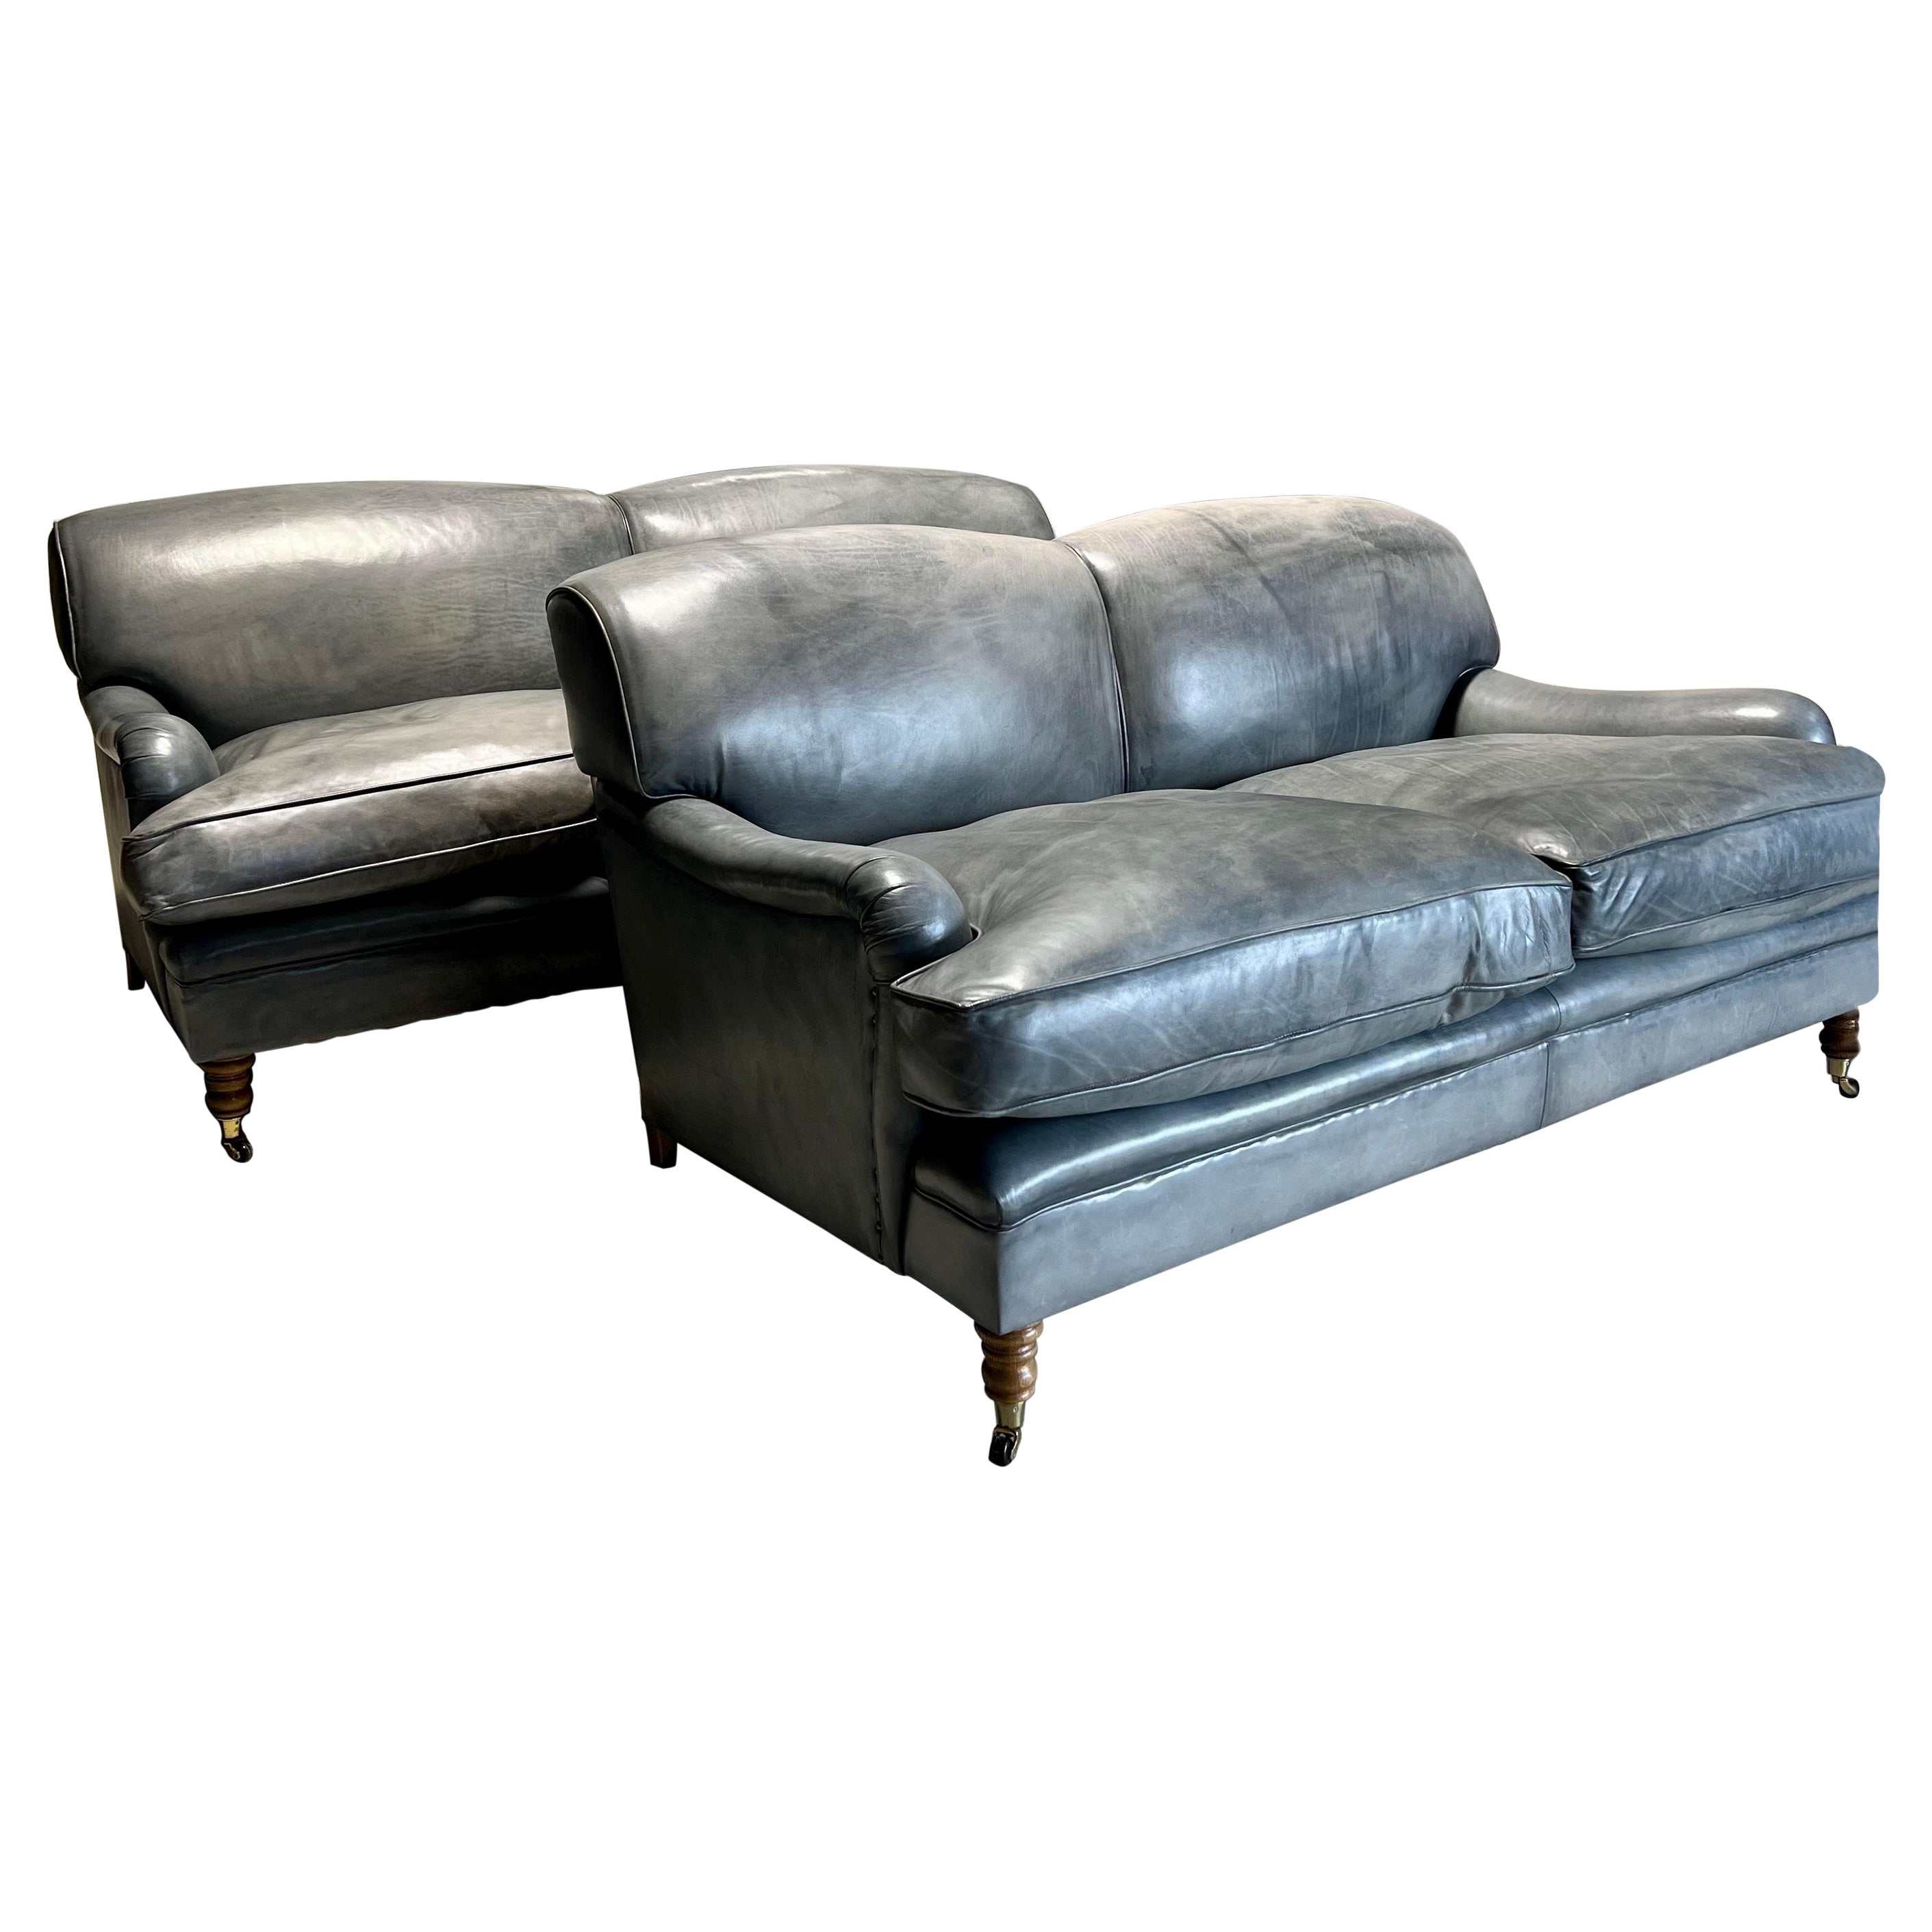 Matching Pair of Our Signature Grenville Sofas - Hand Dyed Elephant Grey Leather For Sale